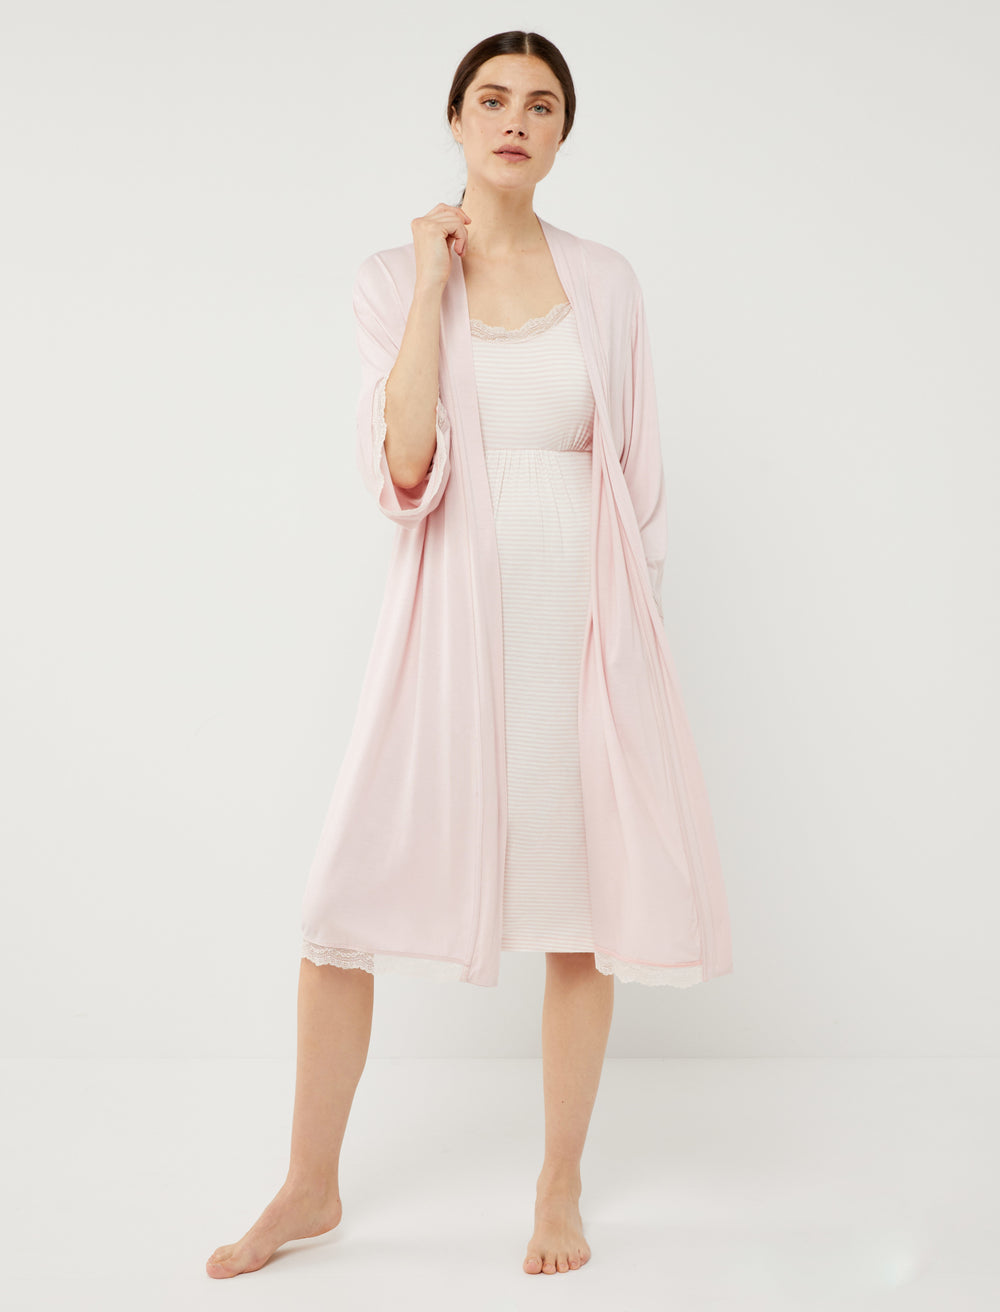 The Best Nursing Nightgown, Robe, and Pajama Sets